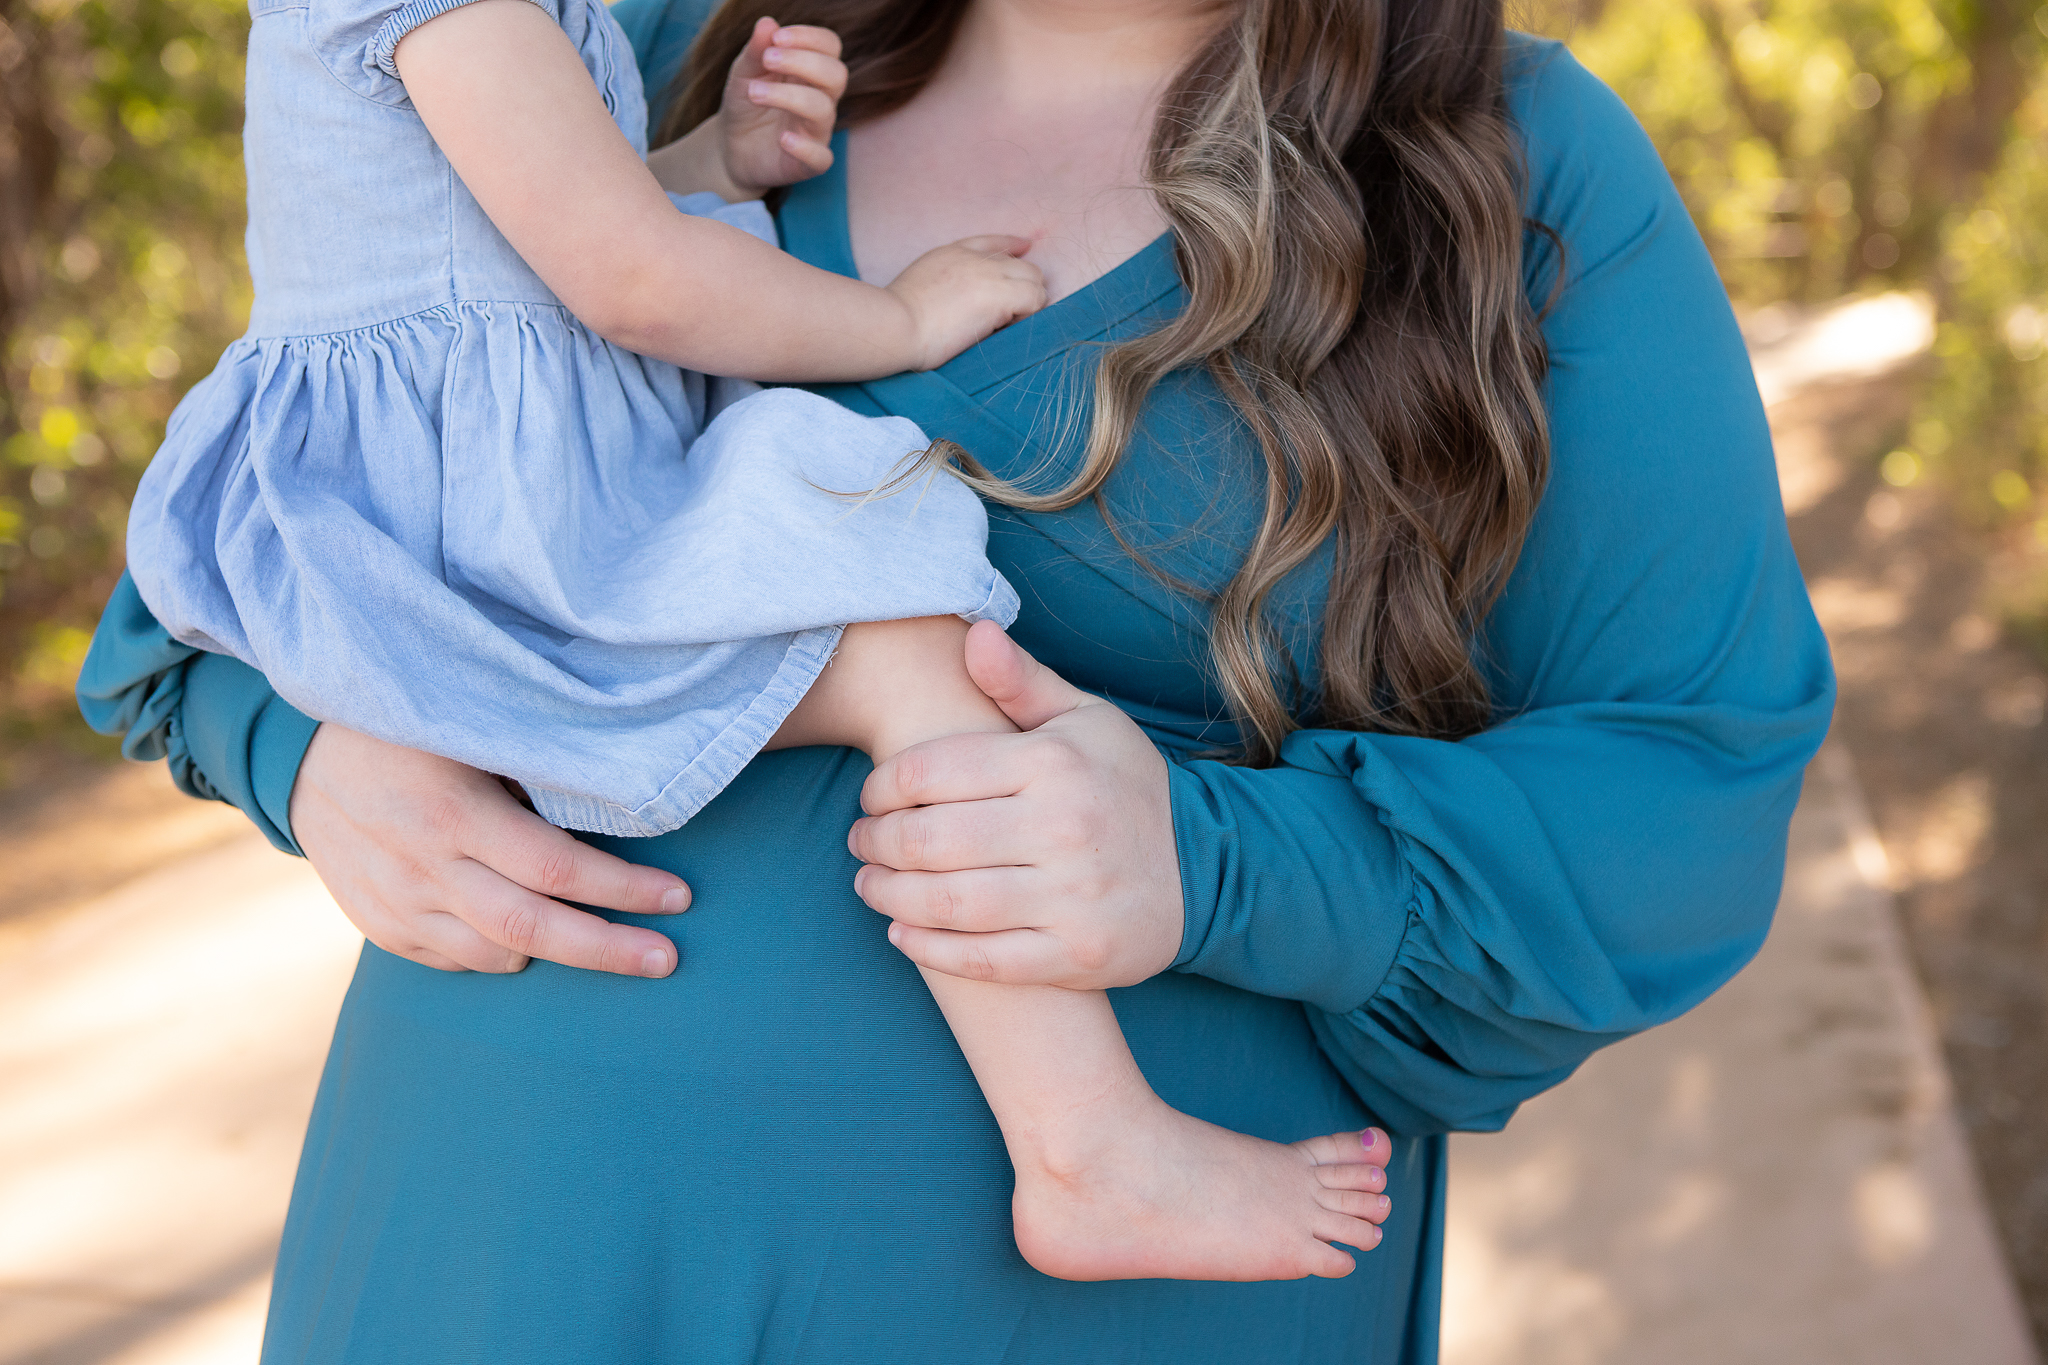 Colorado Springs Maternity Photography | The W Family